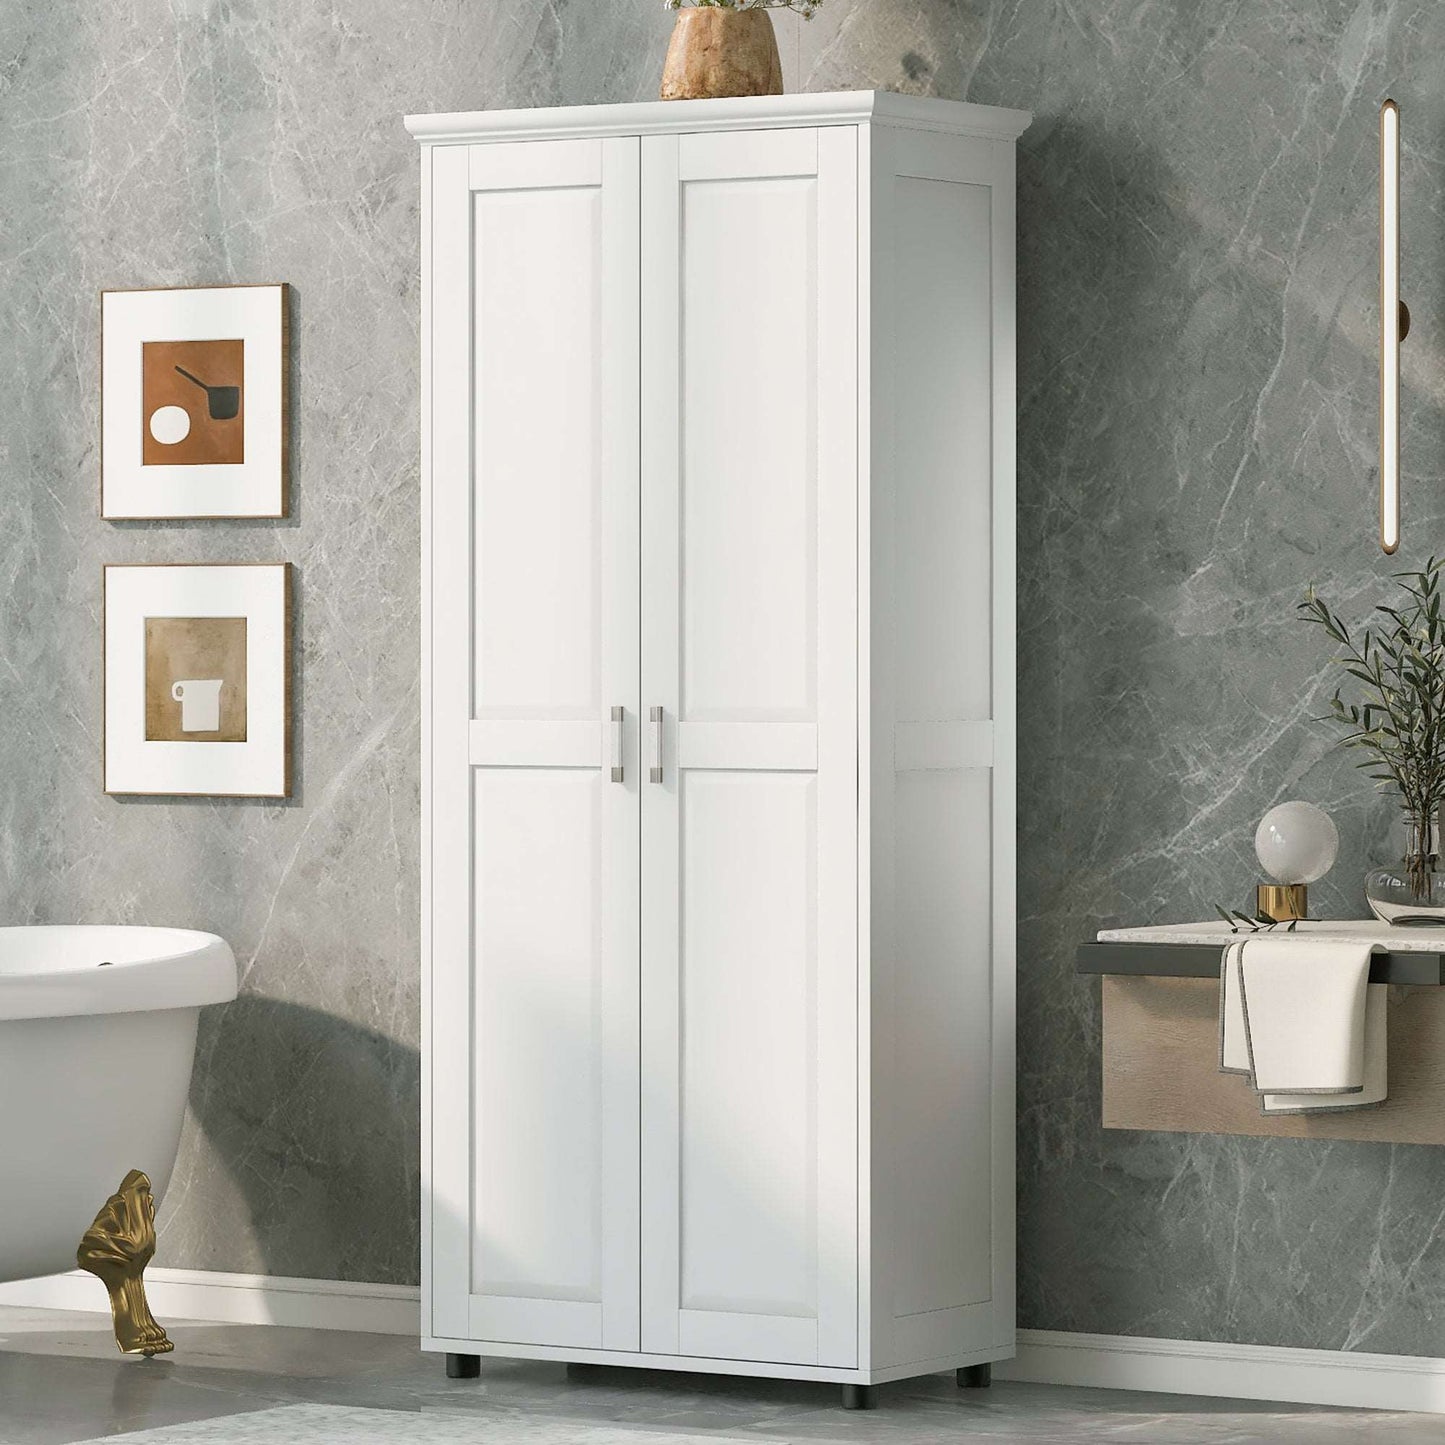 bathroom white cabinet with two doors for adjustable shel